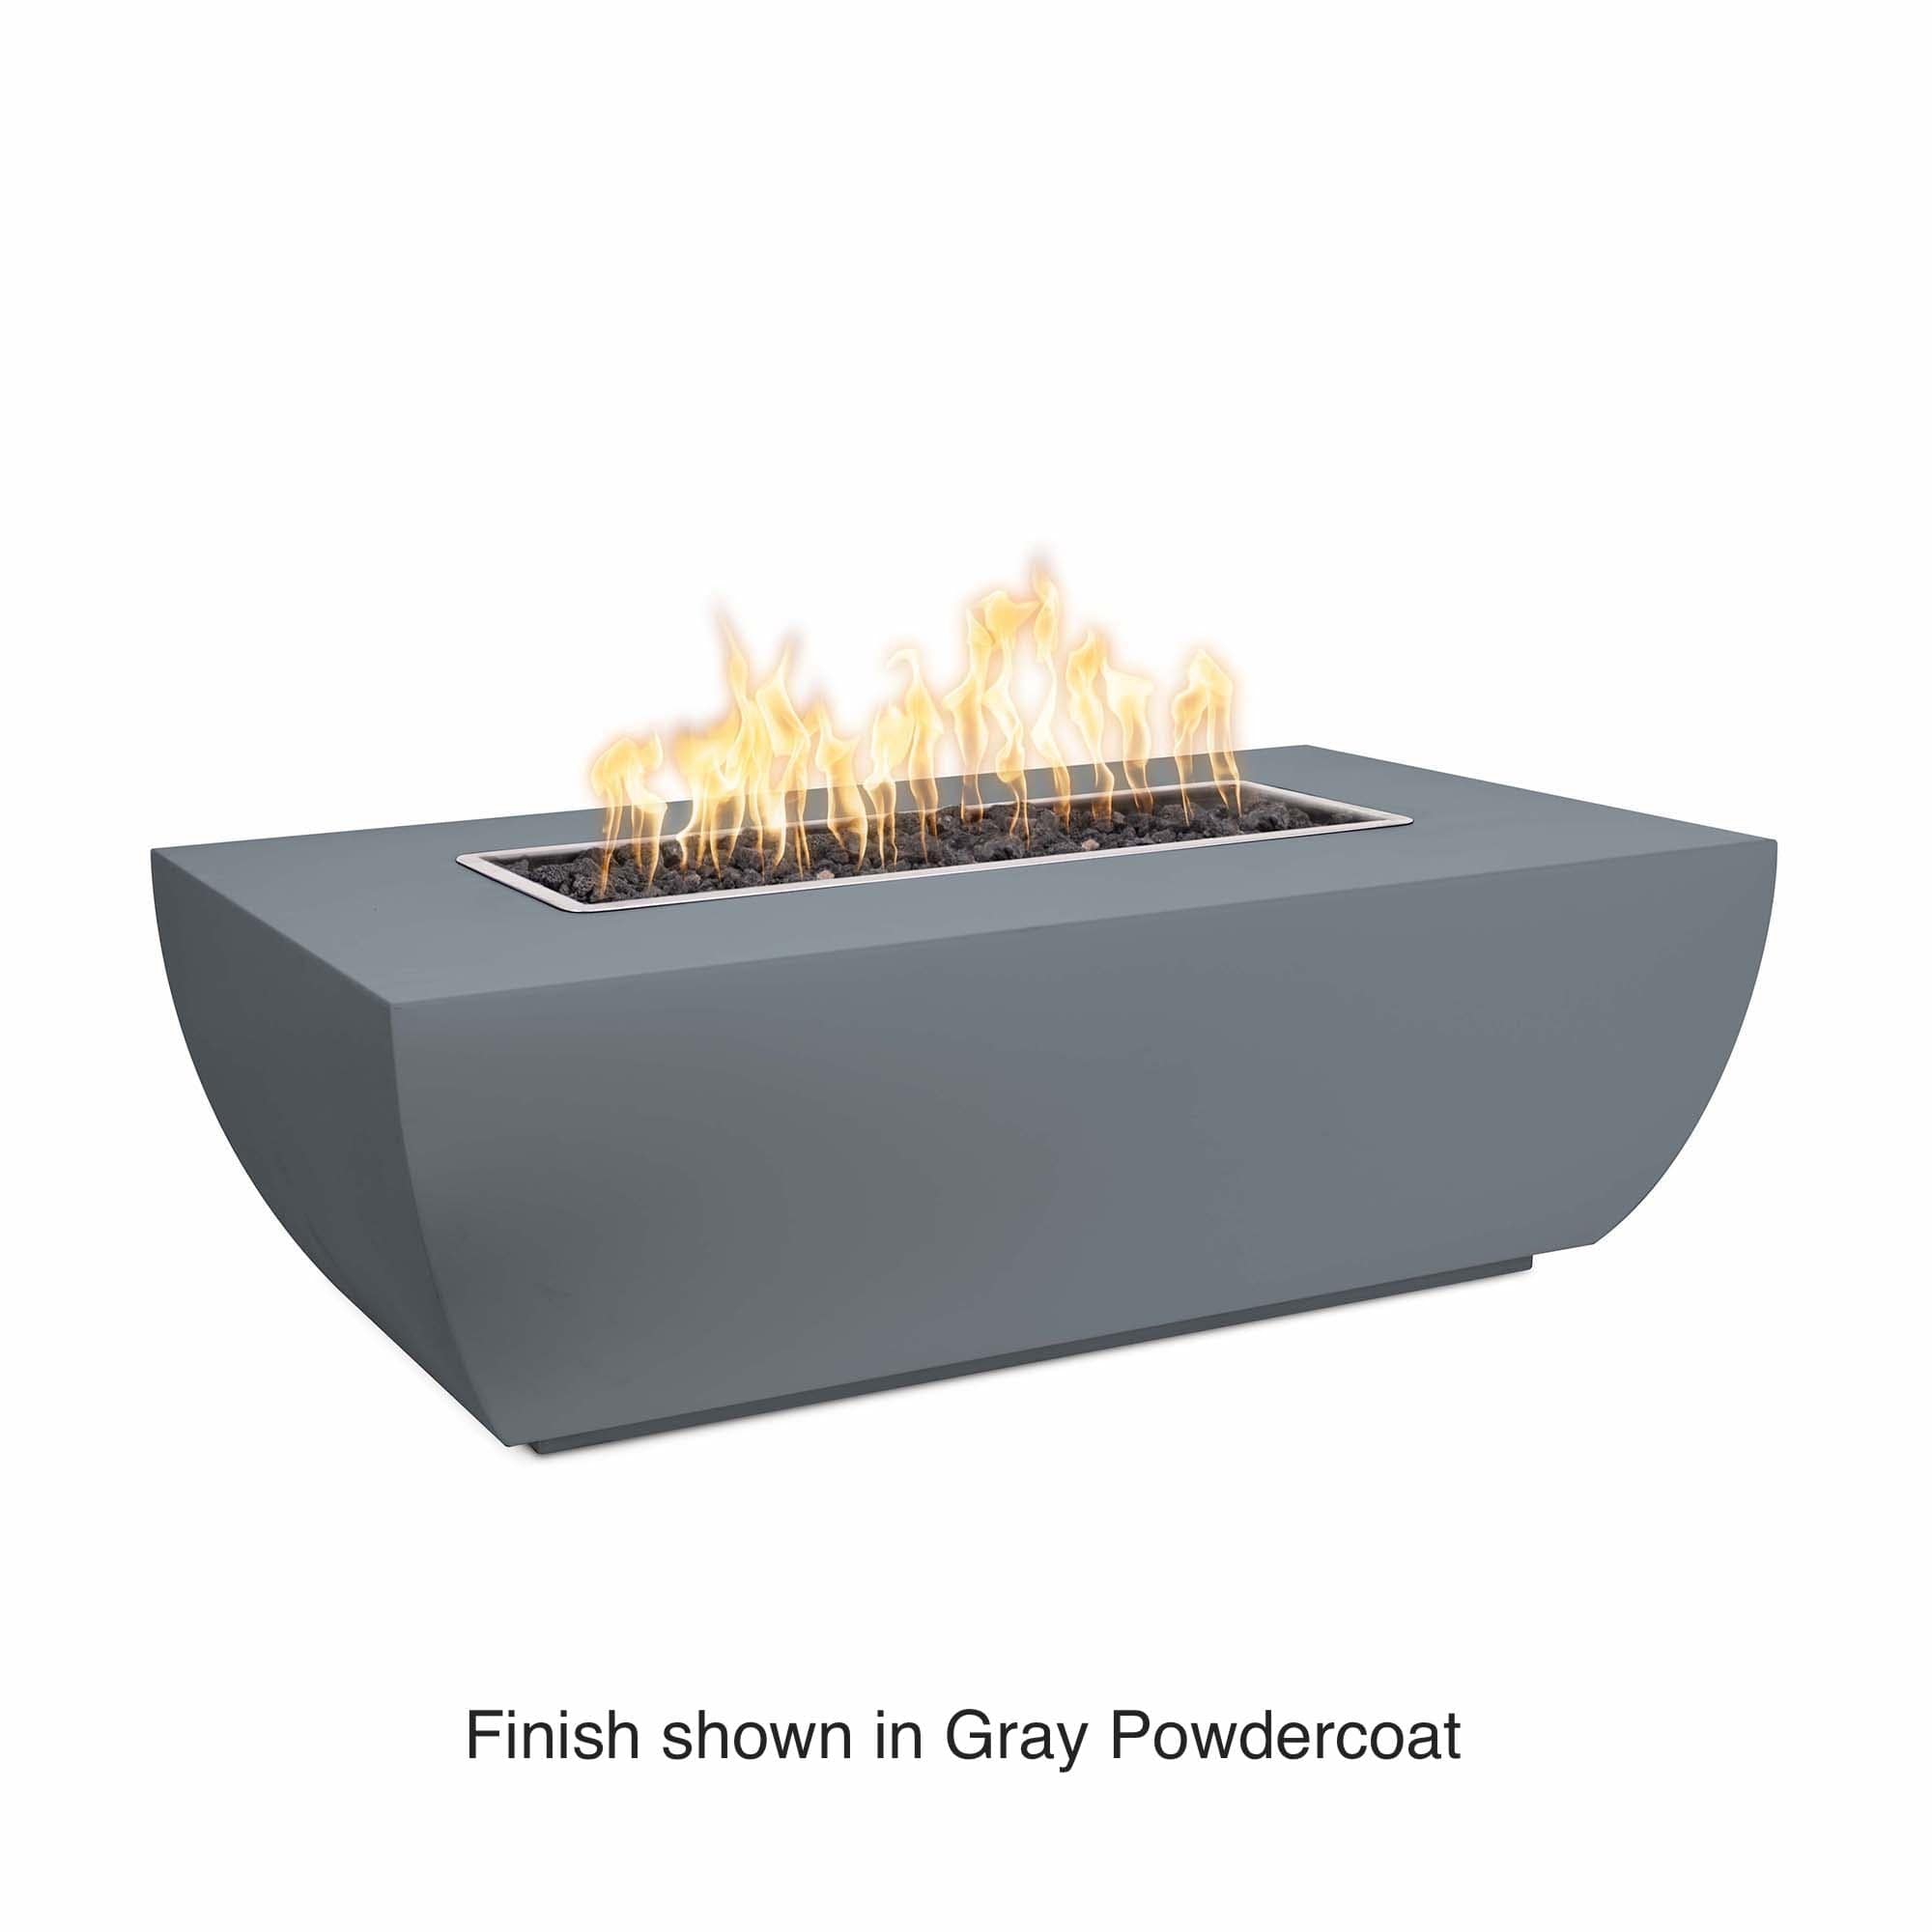 The Outdoor Plus Fire Features The Outdoor Plus 15" Tall 48", 60", 72", 84" Rectangular Avalon Powder Coated Fire Pit / OPT-AVLPCxx15, OPT-AVLPCxx15FSML, OPT-AVLPCxx15FSEN, OPT-AVLPCxx15E12V, OPT-AVLPCxx15EKIT